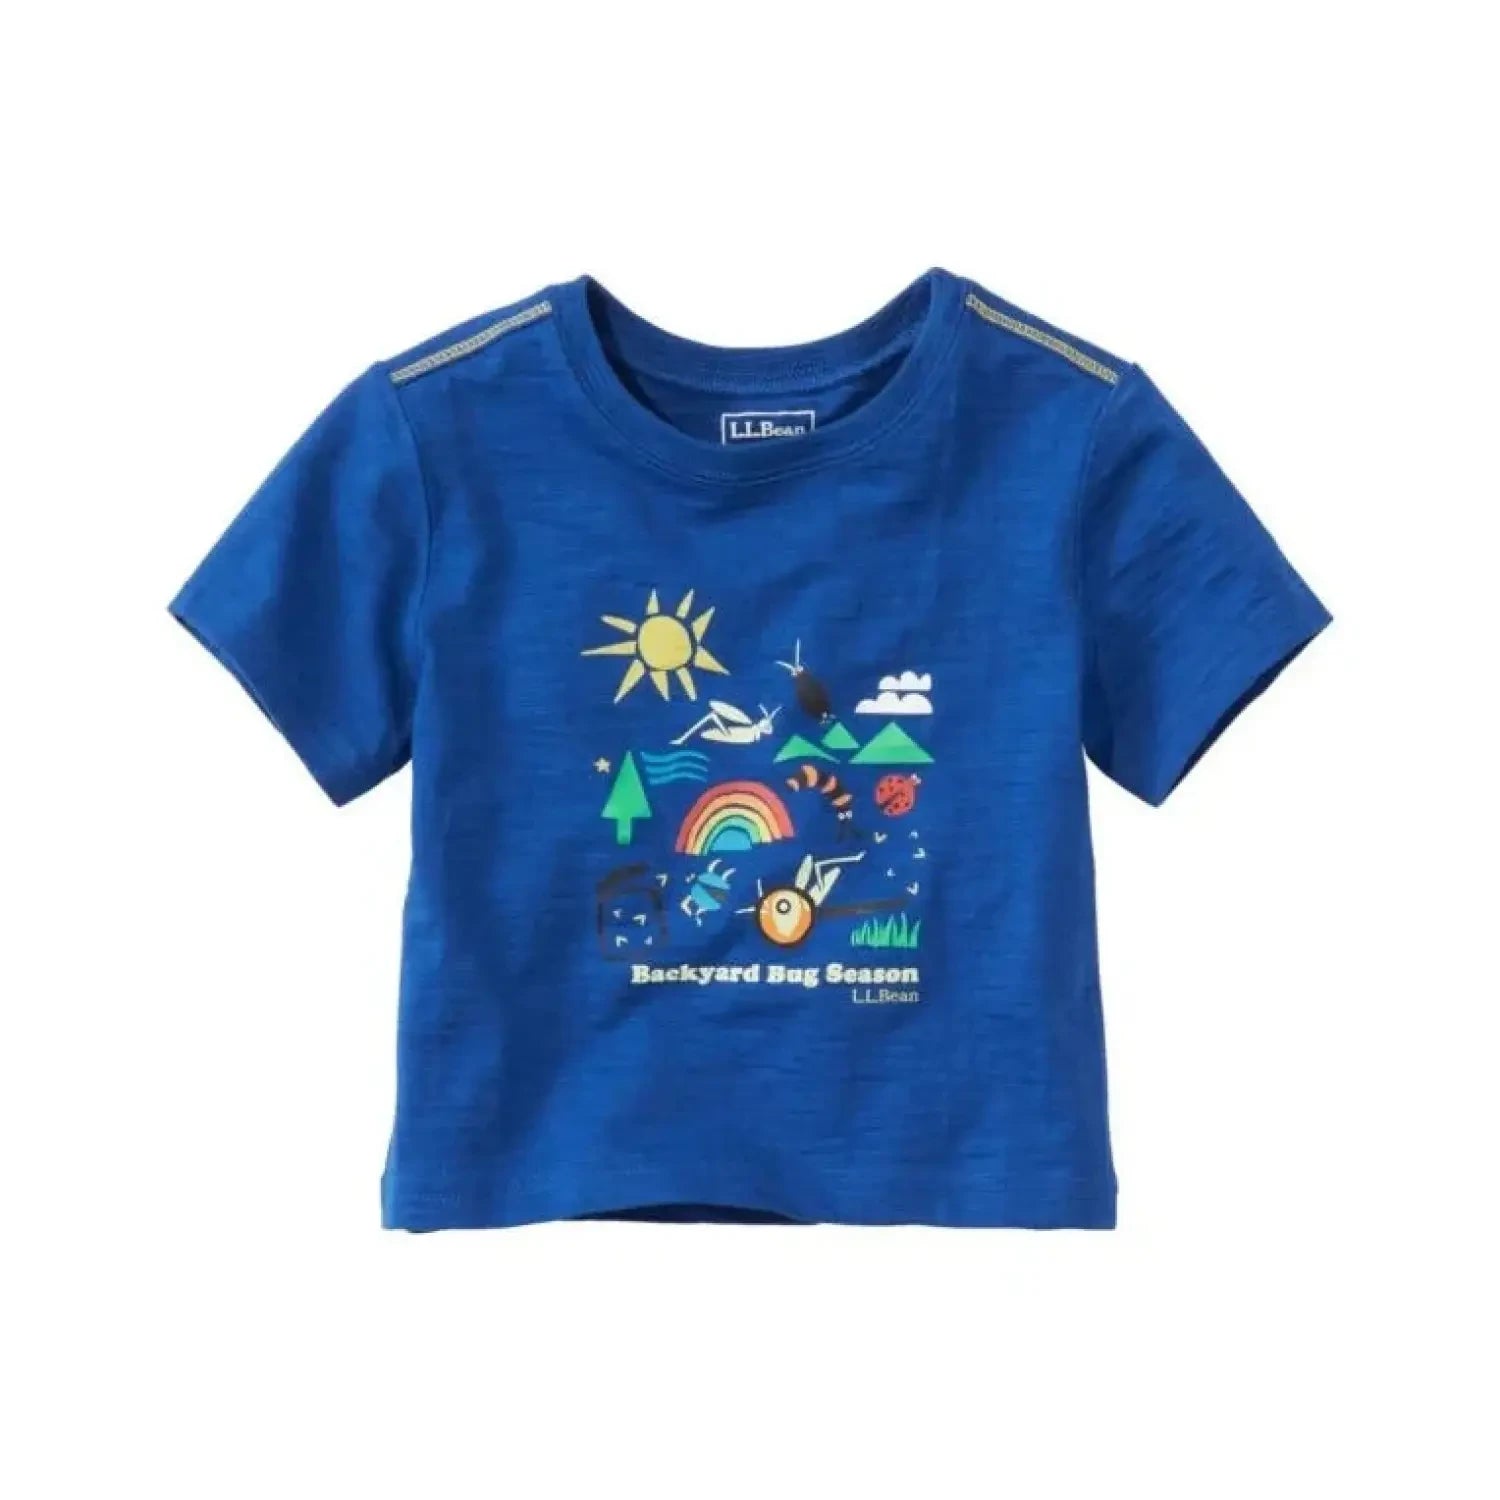 LL Bean Toddler Graphic Tee shown in the Regatta Blue Bugs color/print. Front view.